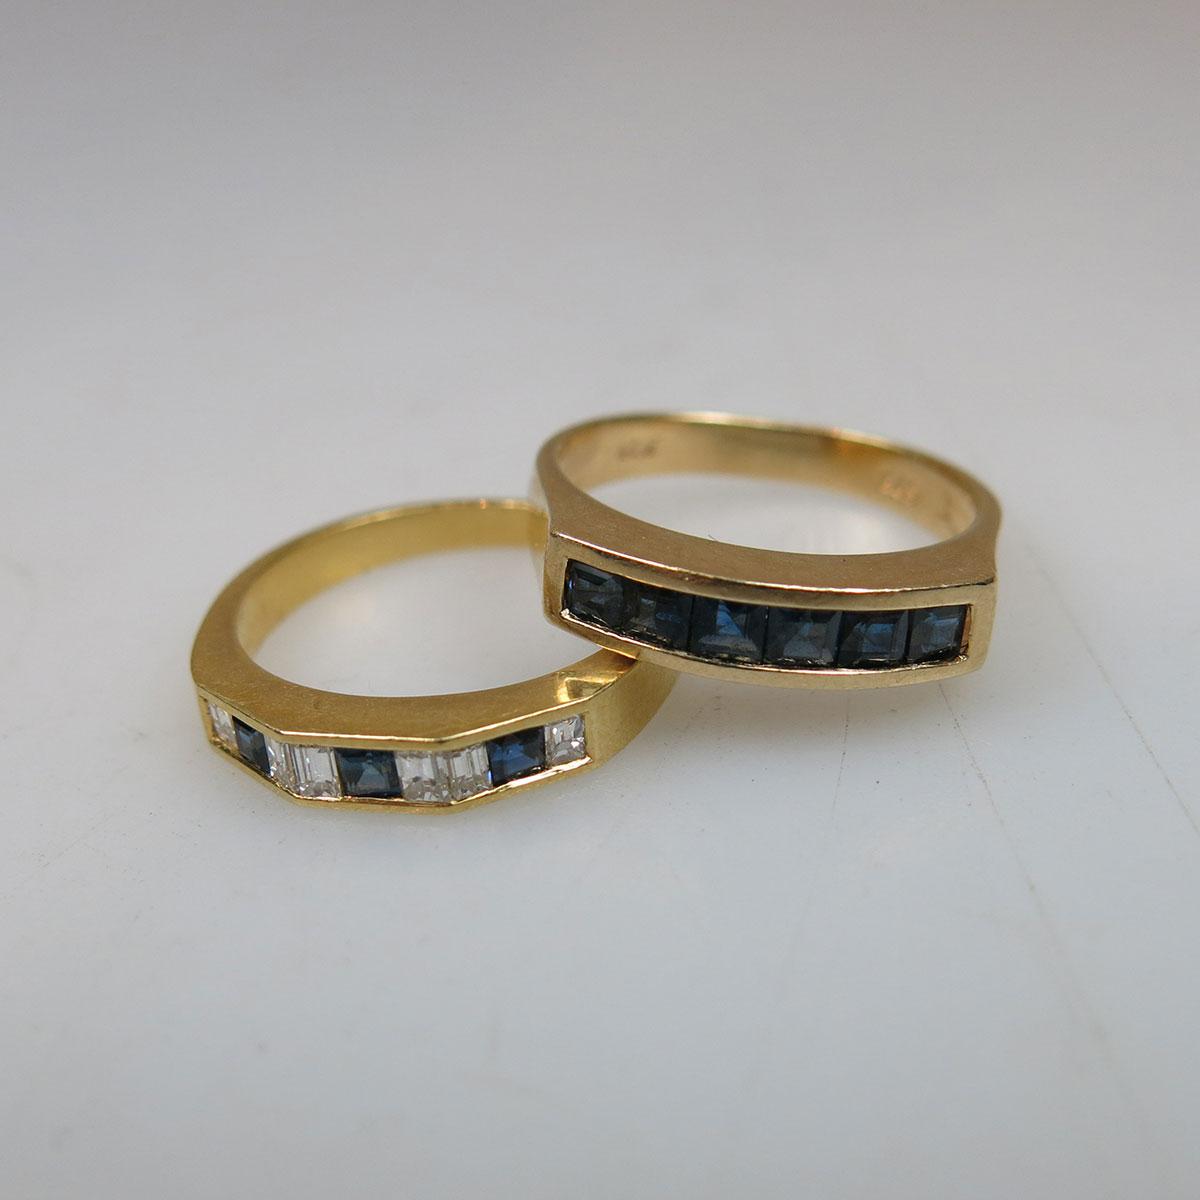 2 x 14k Yellow Gold Bands